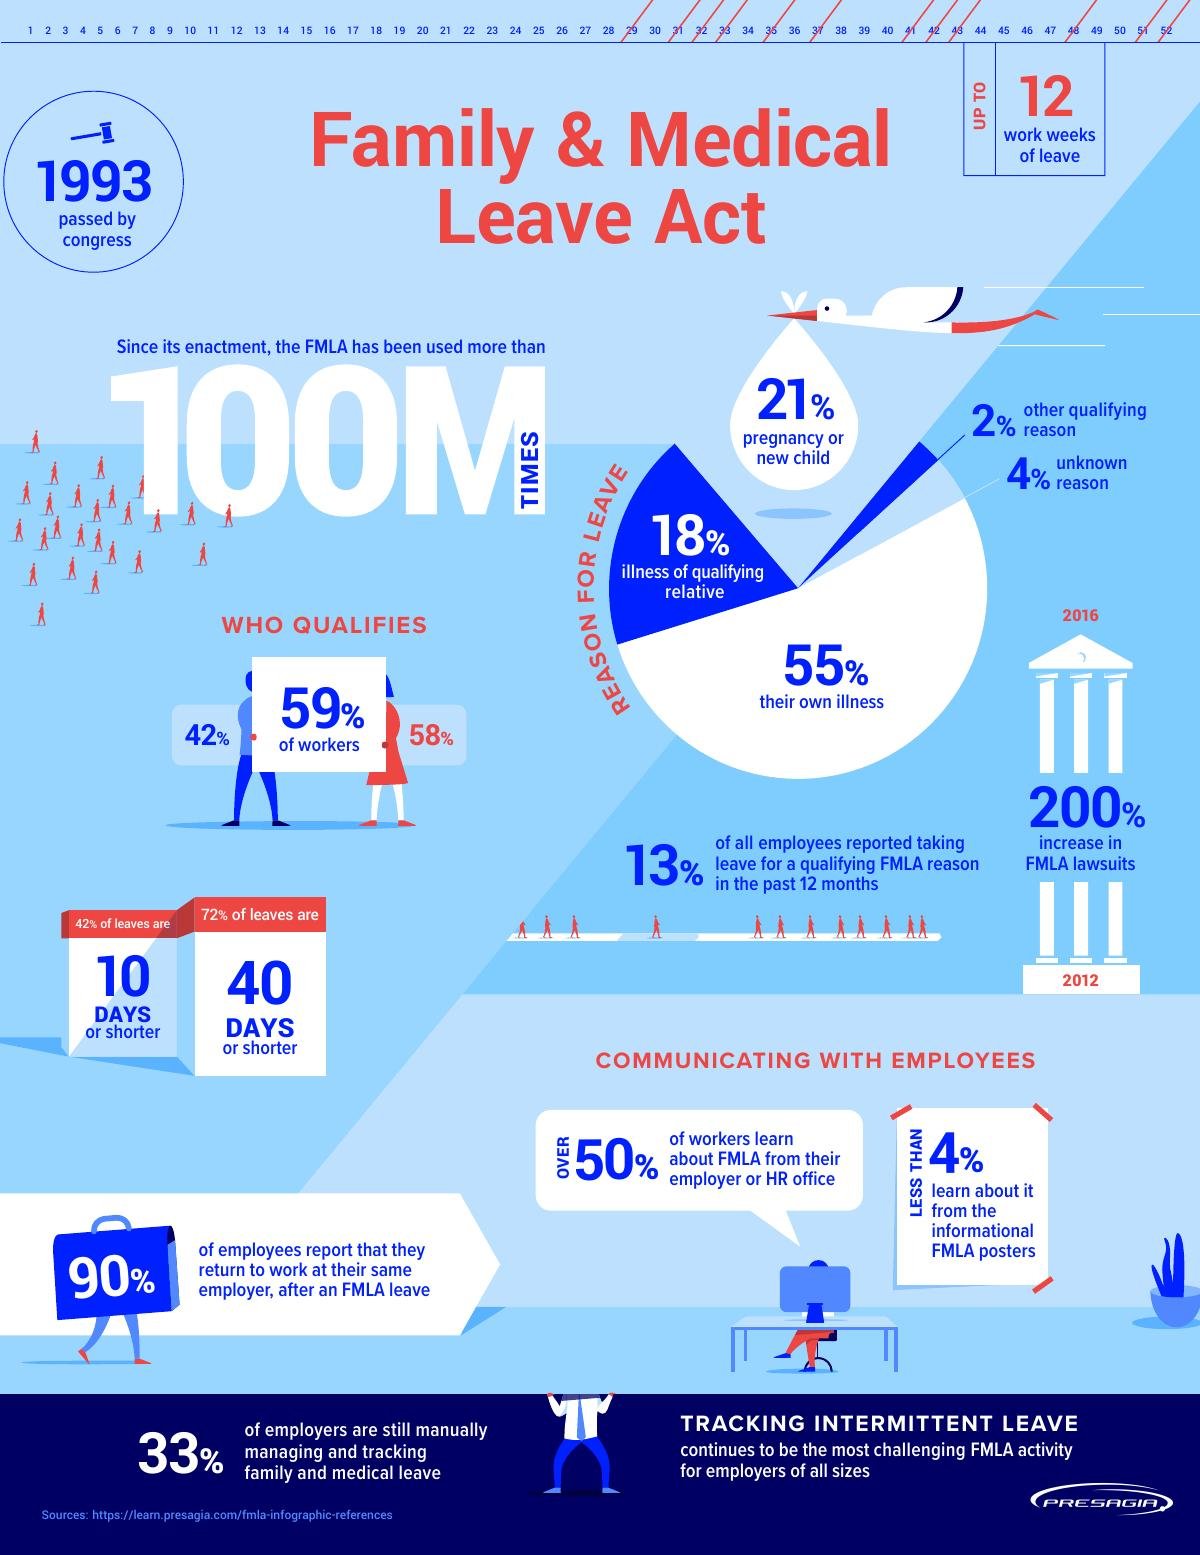 Infographic: The Family and Medical Leave Act (FMLA)